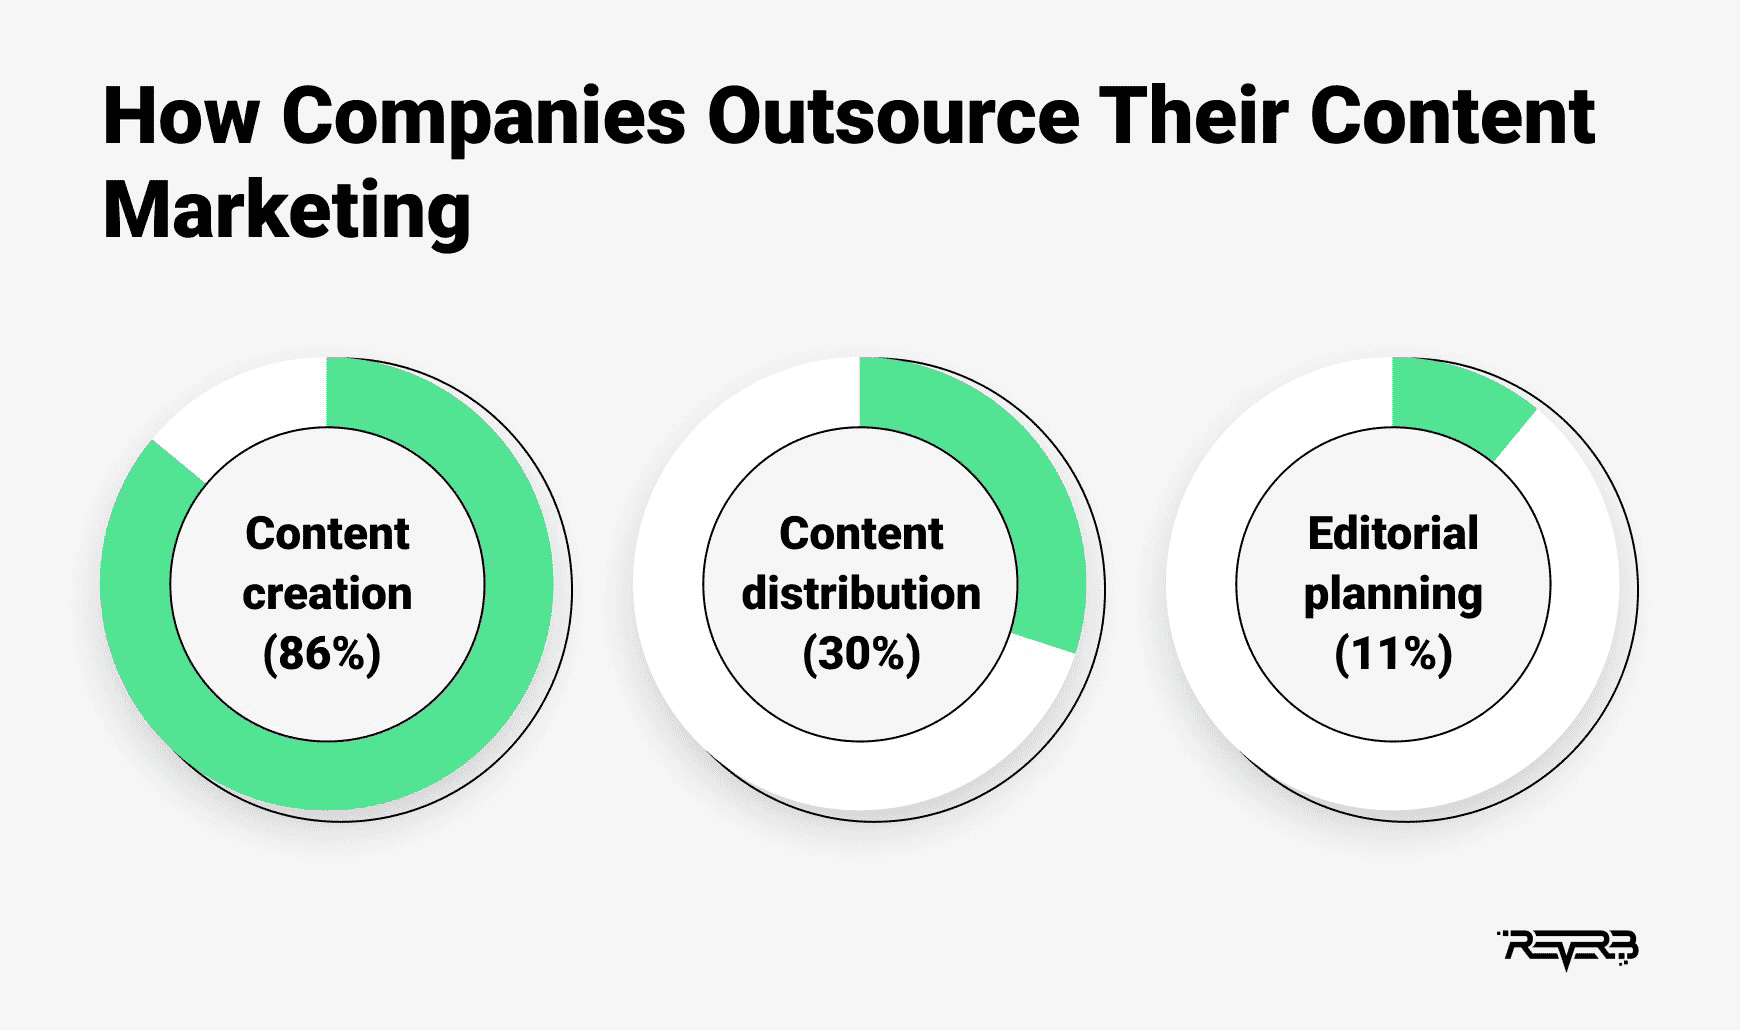 86% of companies outsource content creation.